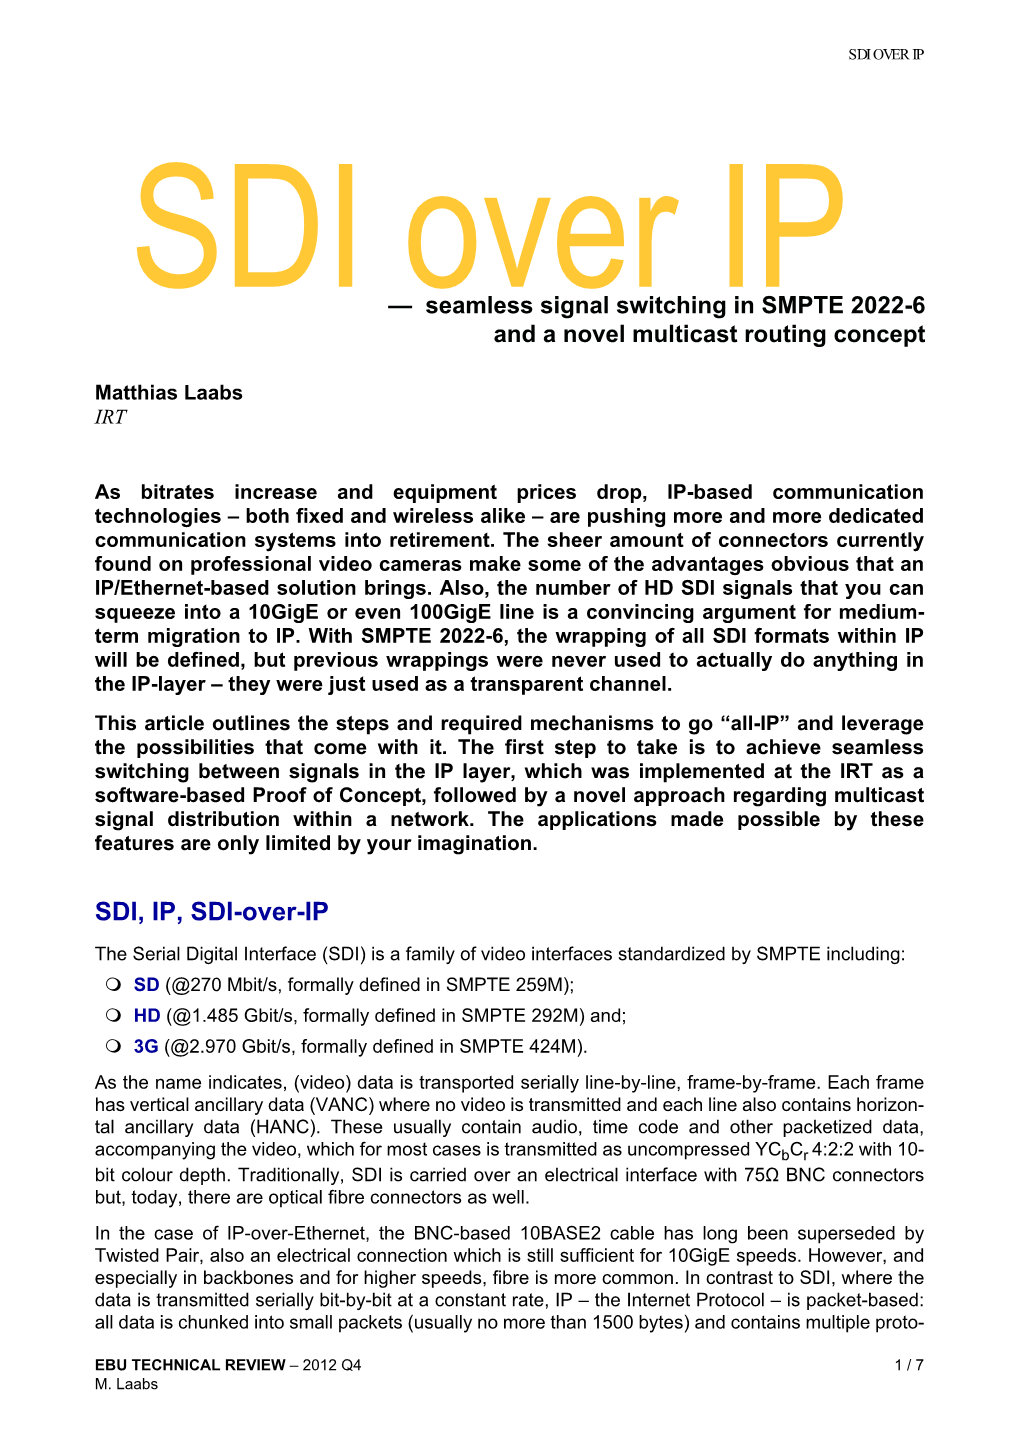 SDI OVER IP SDI Over IP — Seamless Signal Switching in SMPTE 2022-6 and a Novel Multicast Routing Concept